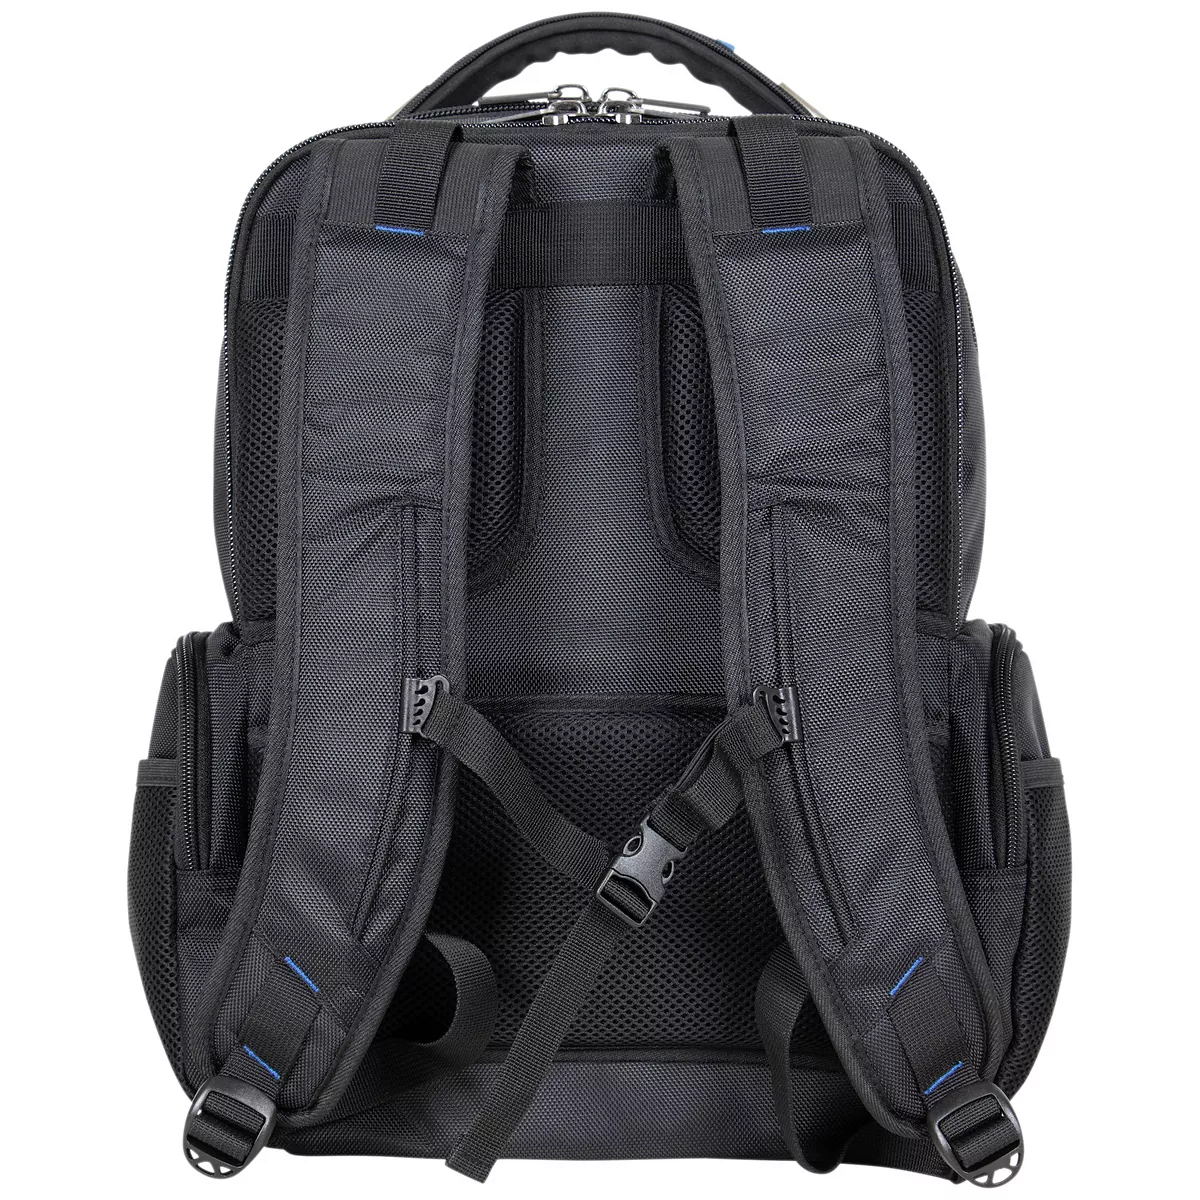 Kenneth Cole(R) Reaction(tm) Triple Compartment Laptop Backpack